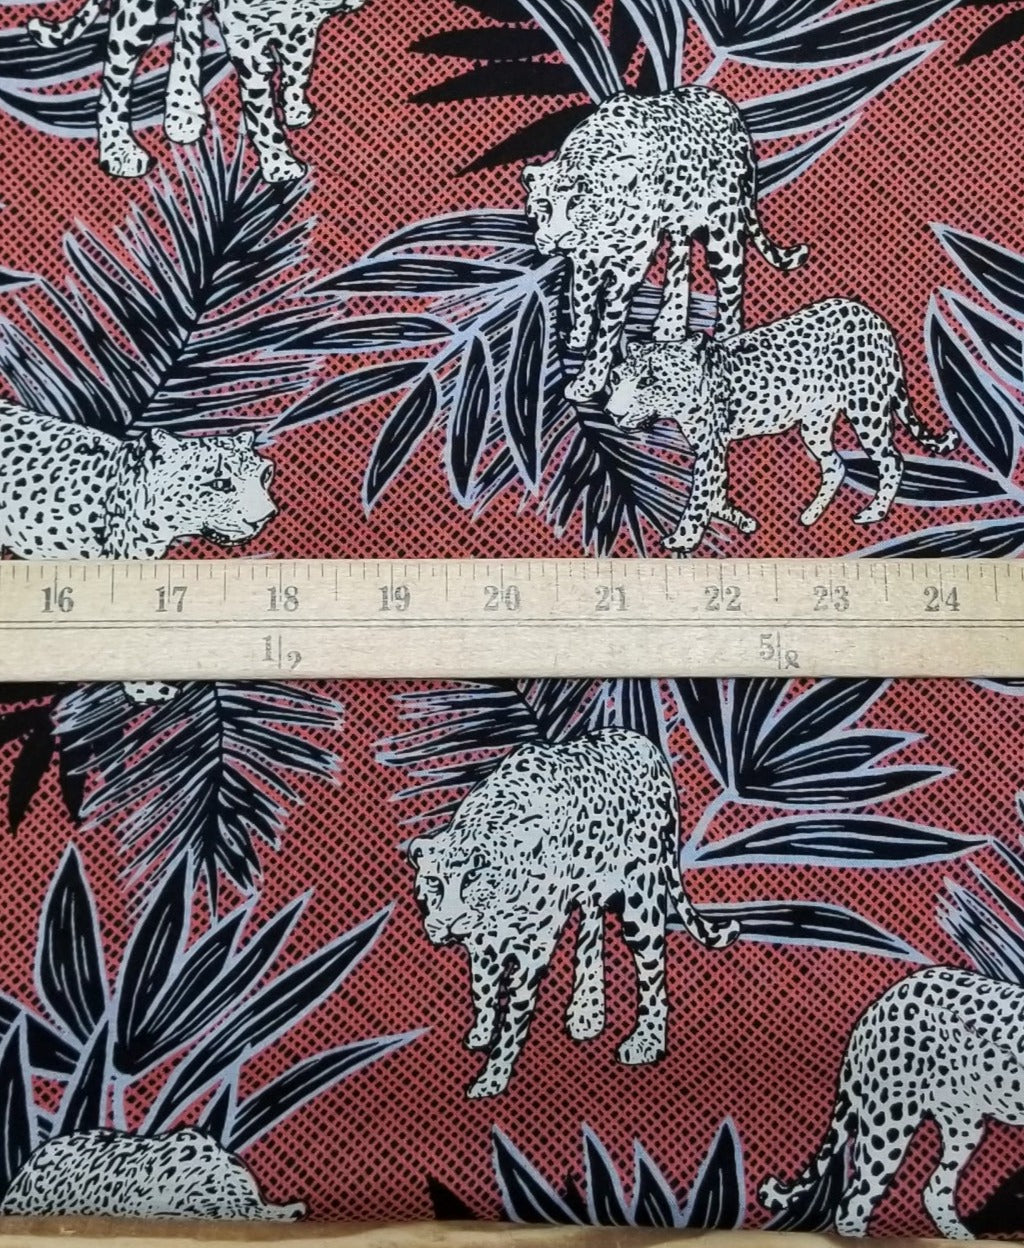 Designer Deadstock Black and Periwinkle Foliage with Cheetahs Rayon Challis Woven- Sold by the yard